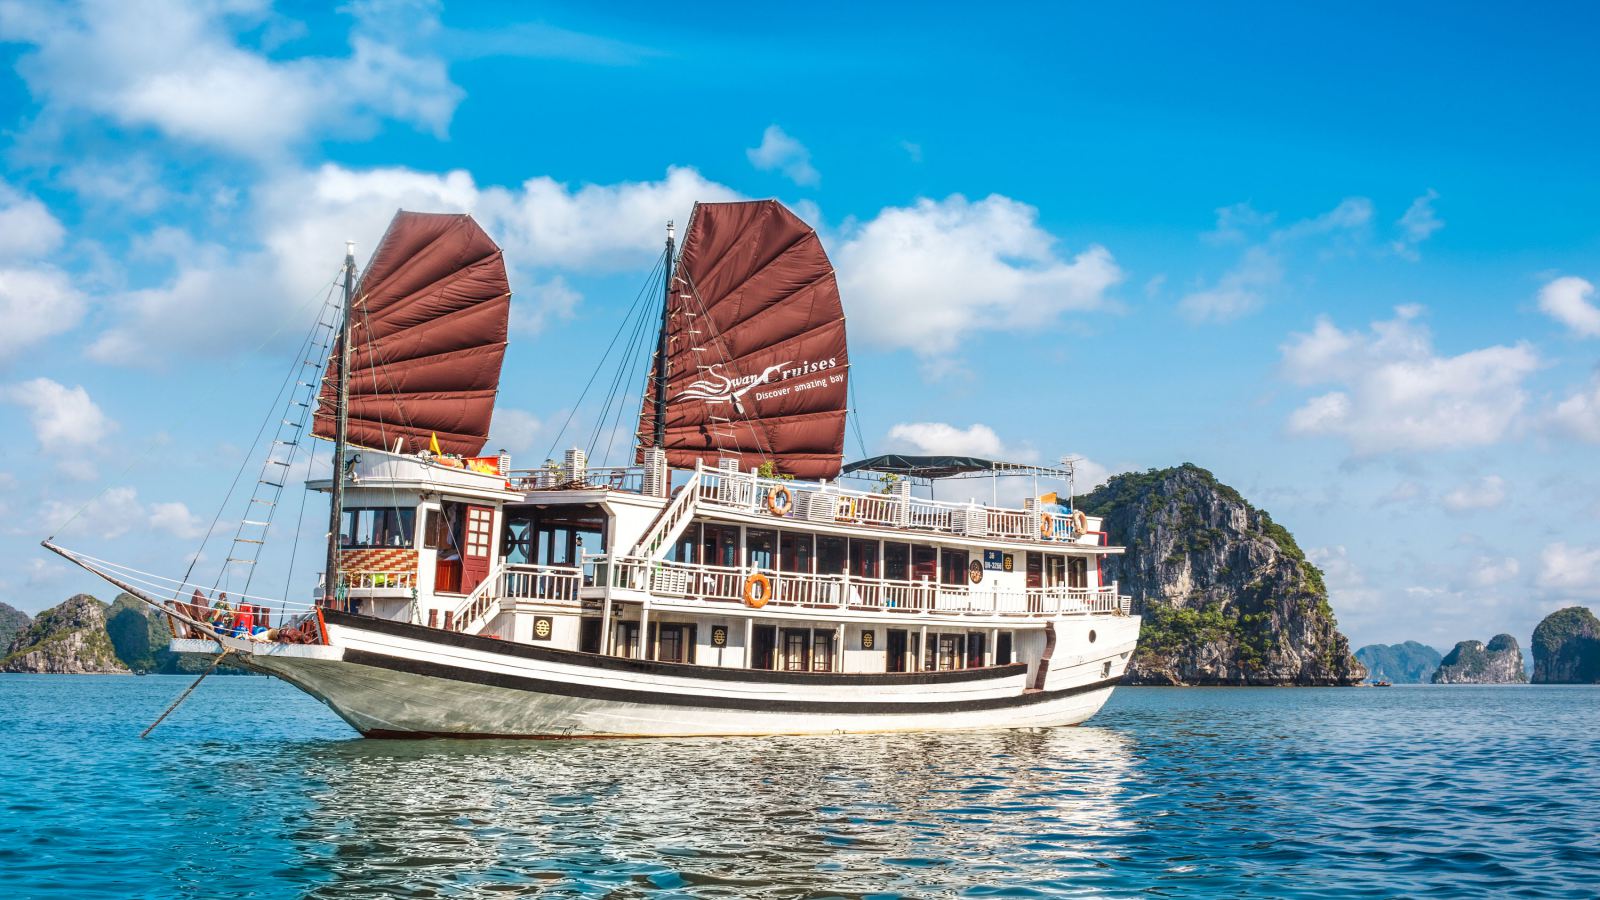 TIPS FOR CHOOSING THE BEST HALONG BAY CRUISE TOUR